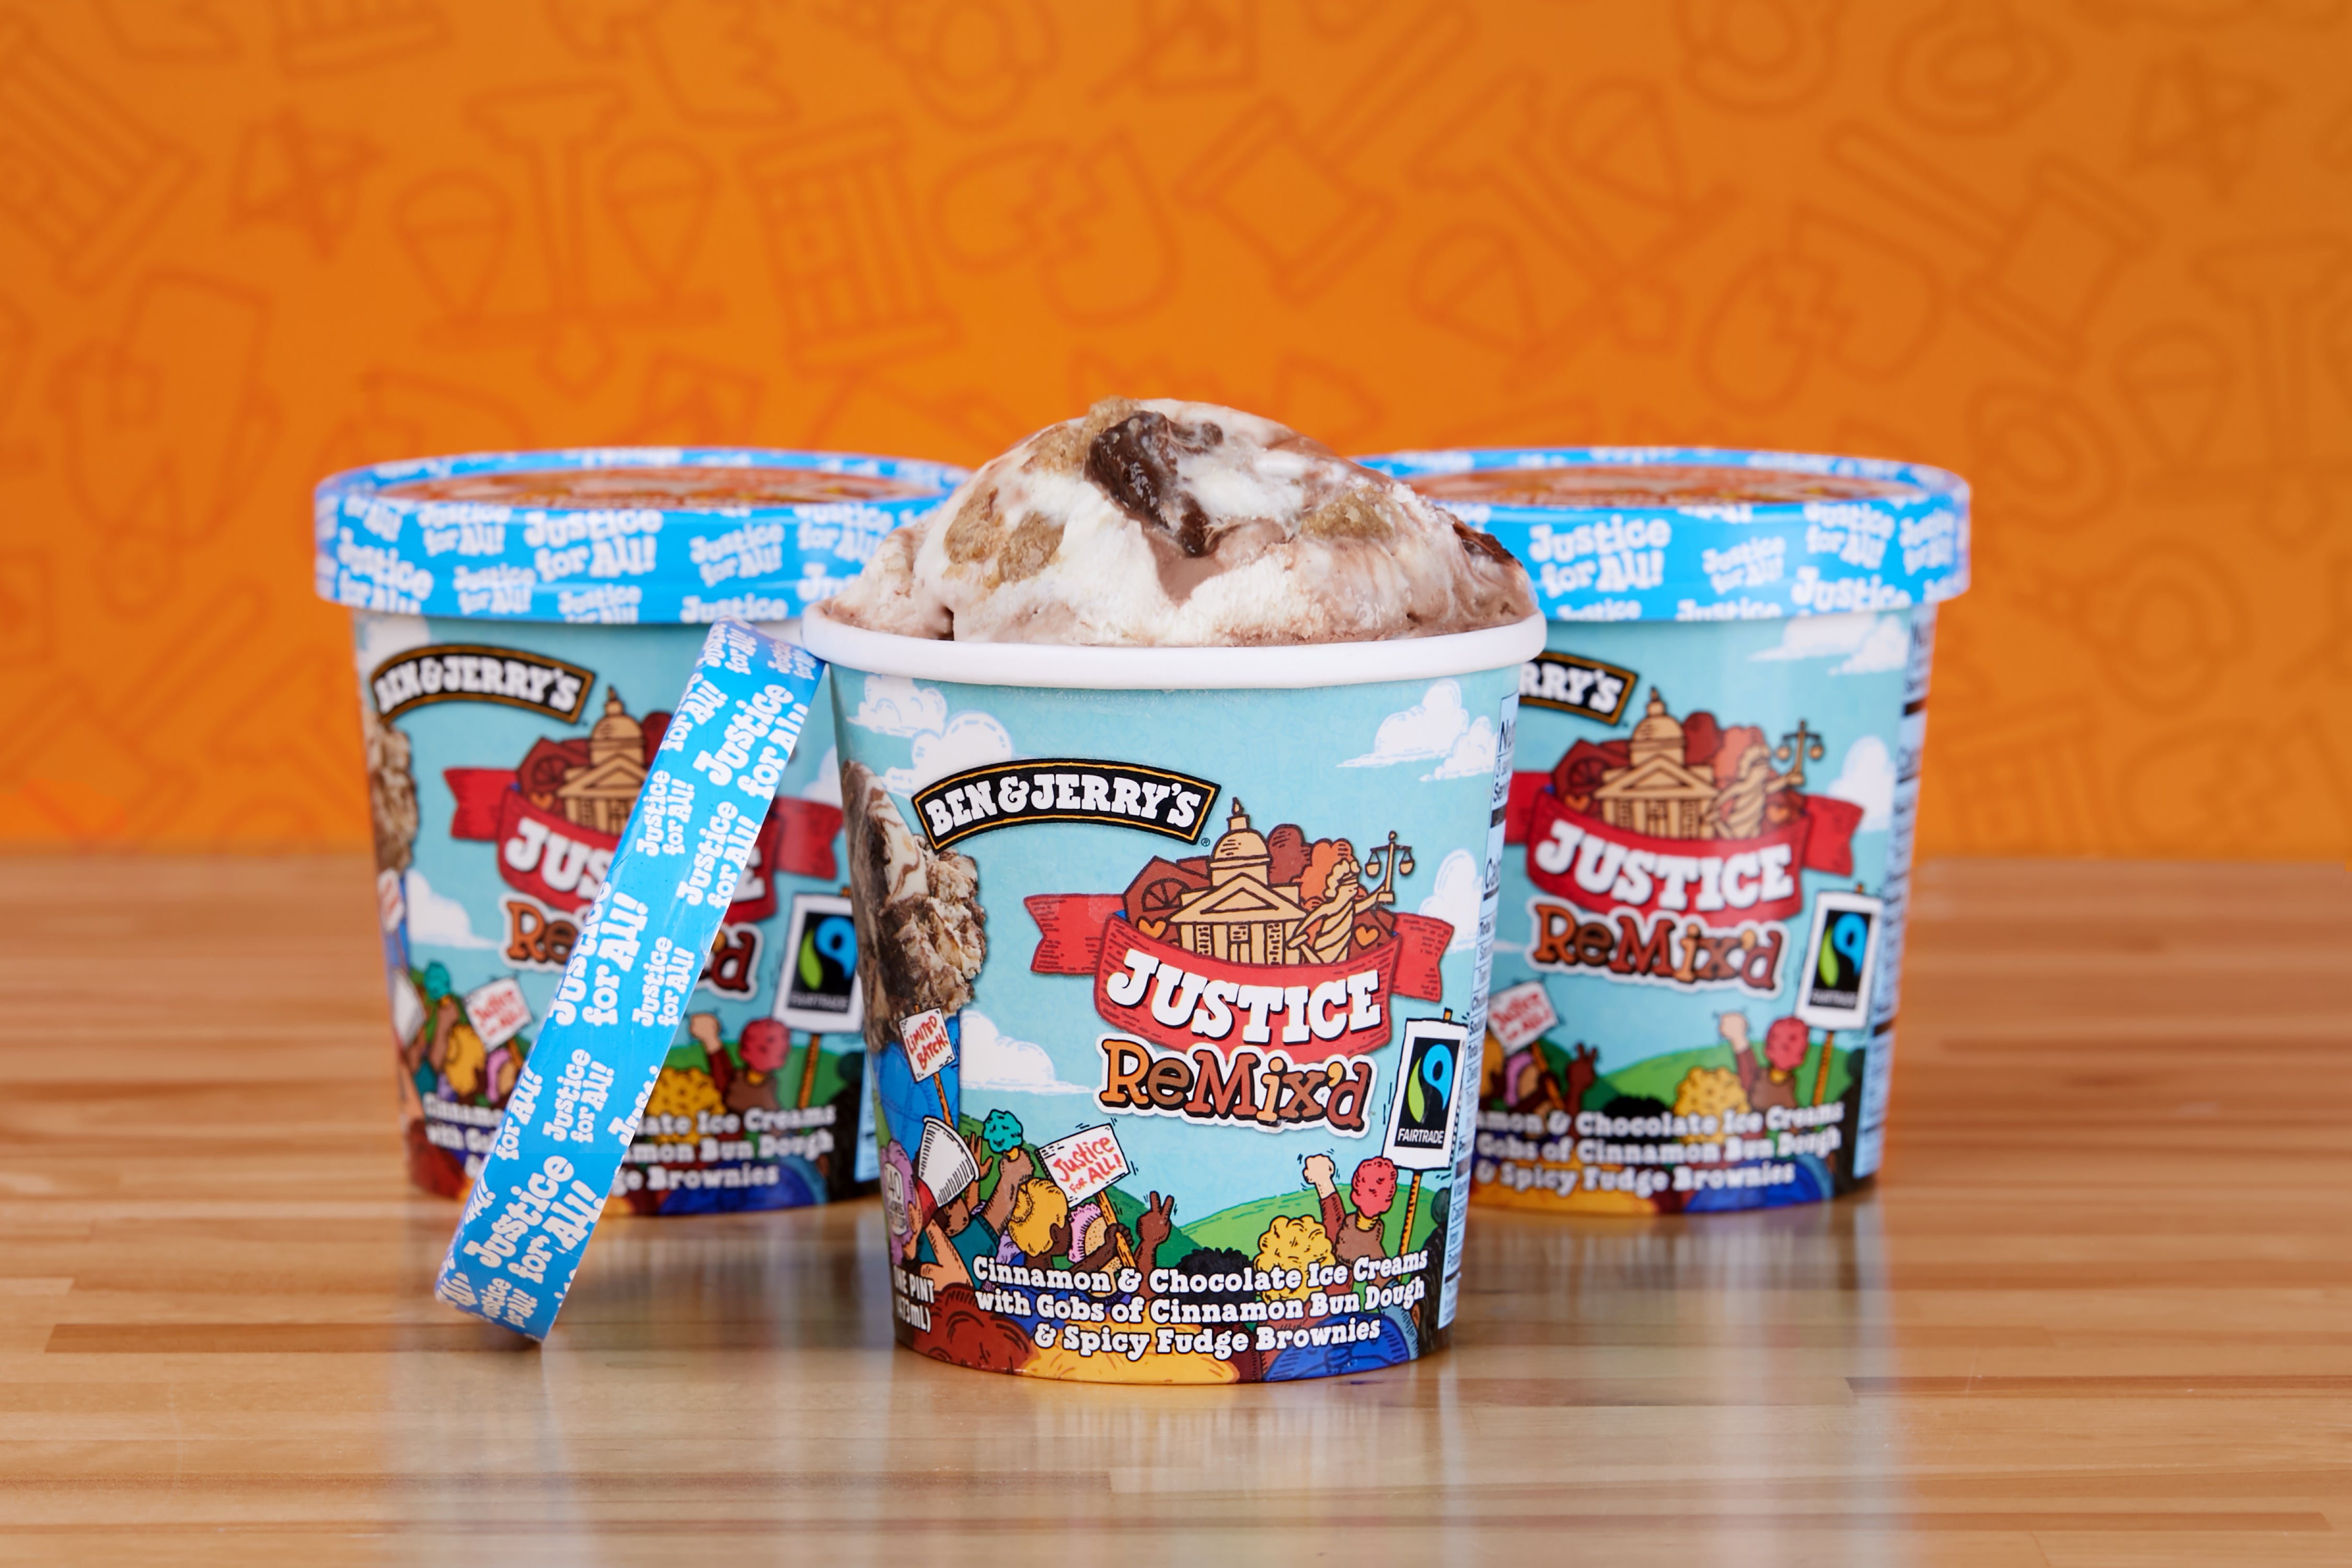 Justice ReMix’d: Ben & Jerry’s Launches New Flavor To Shine Spotlight On Criminal Justice Reform